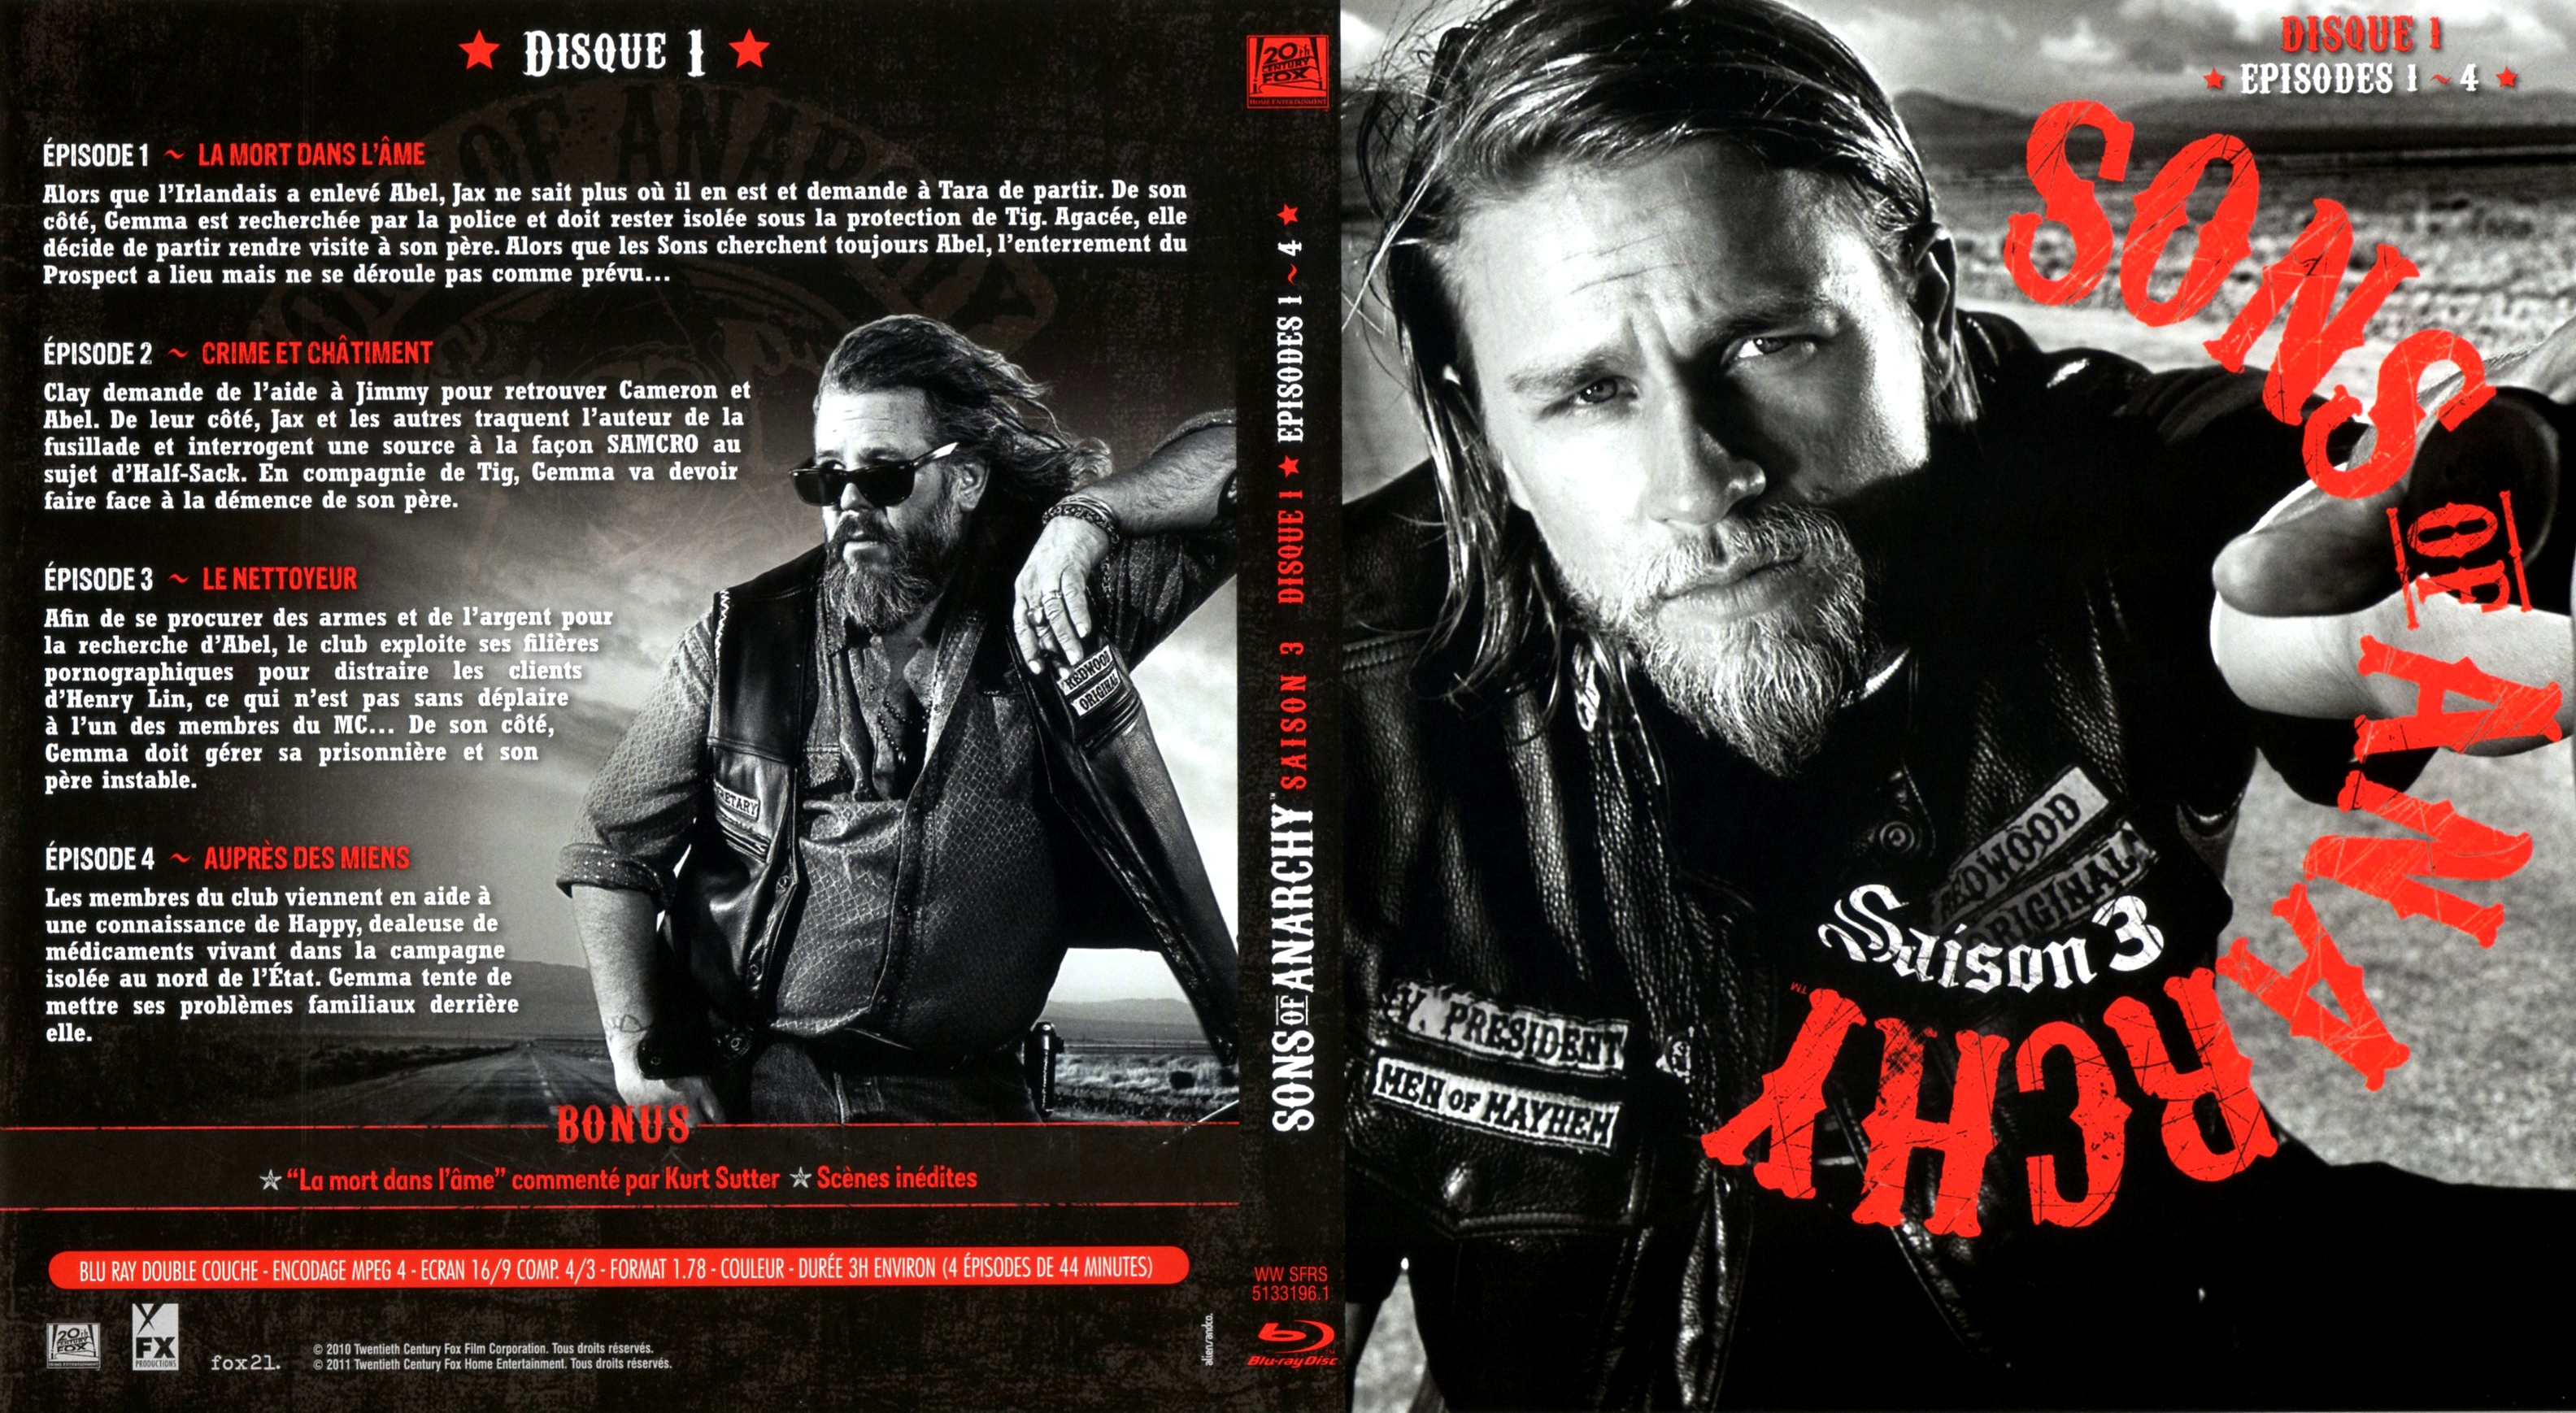 Jaquette DVD Sons of anarchy Saison 3 DISC 1 (BLU-RAY)